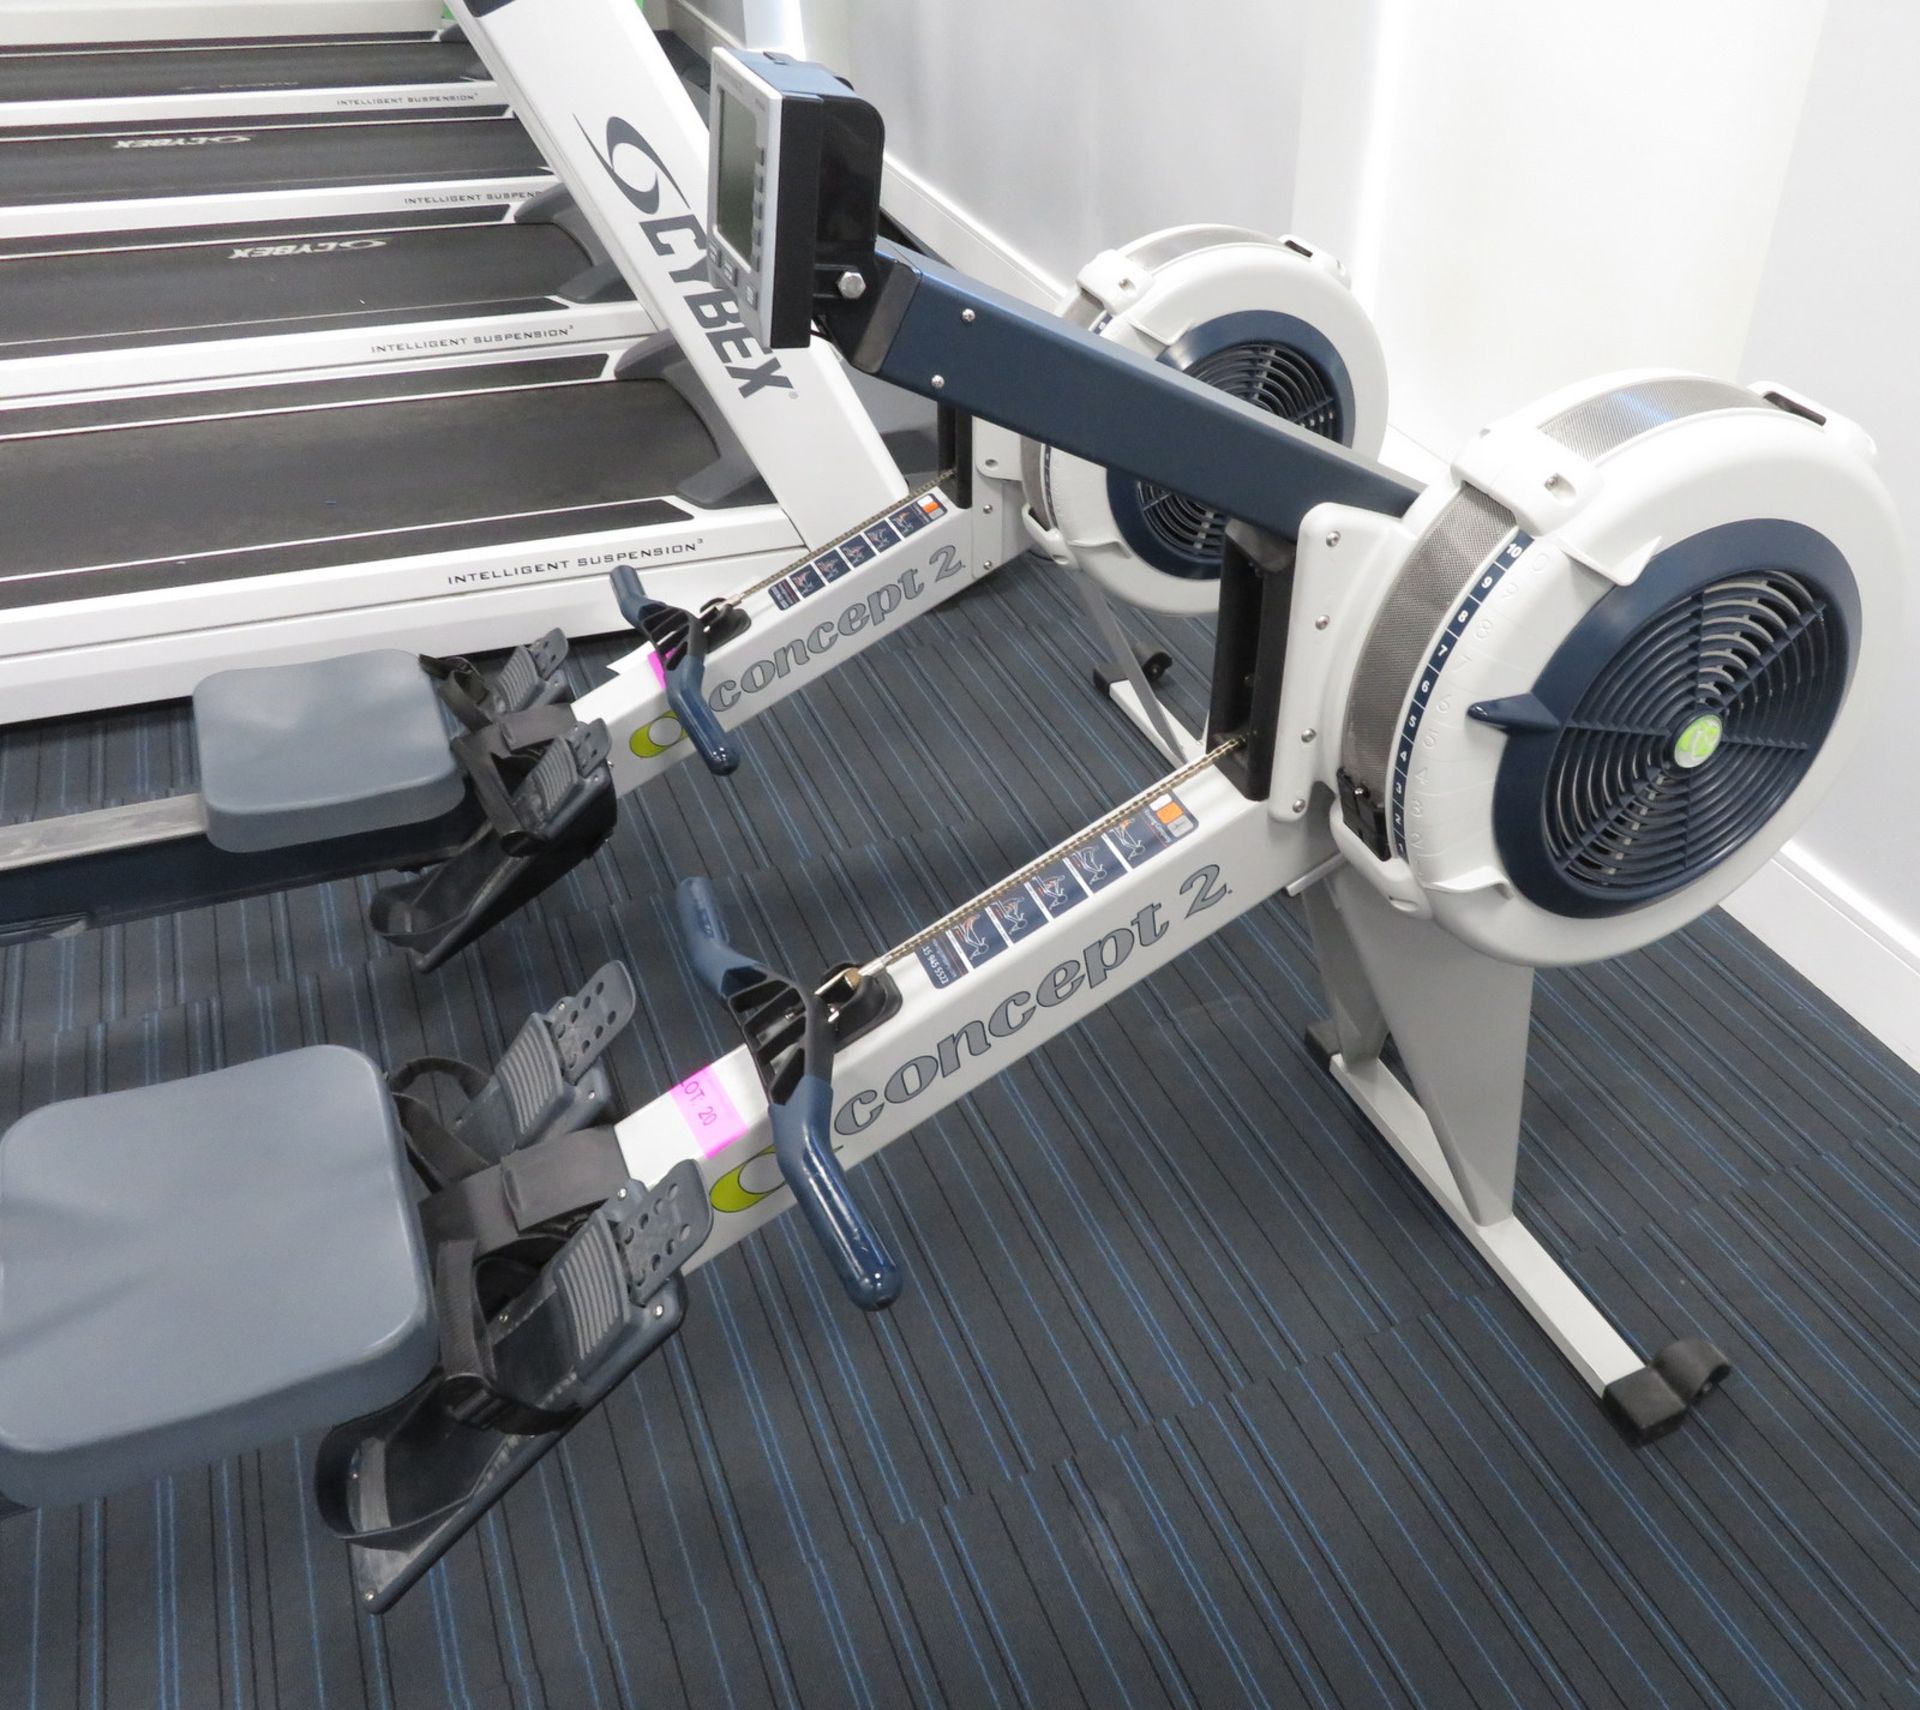 Concept 2 Indoor Rower Model E, Complete With PM4 Display Console. - Image 2 of 10